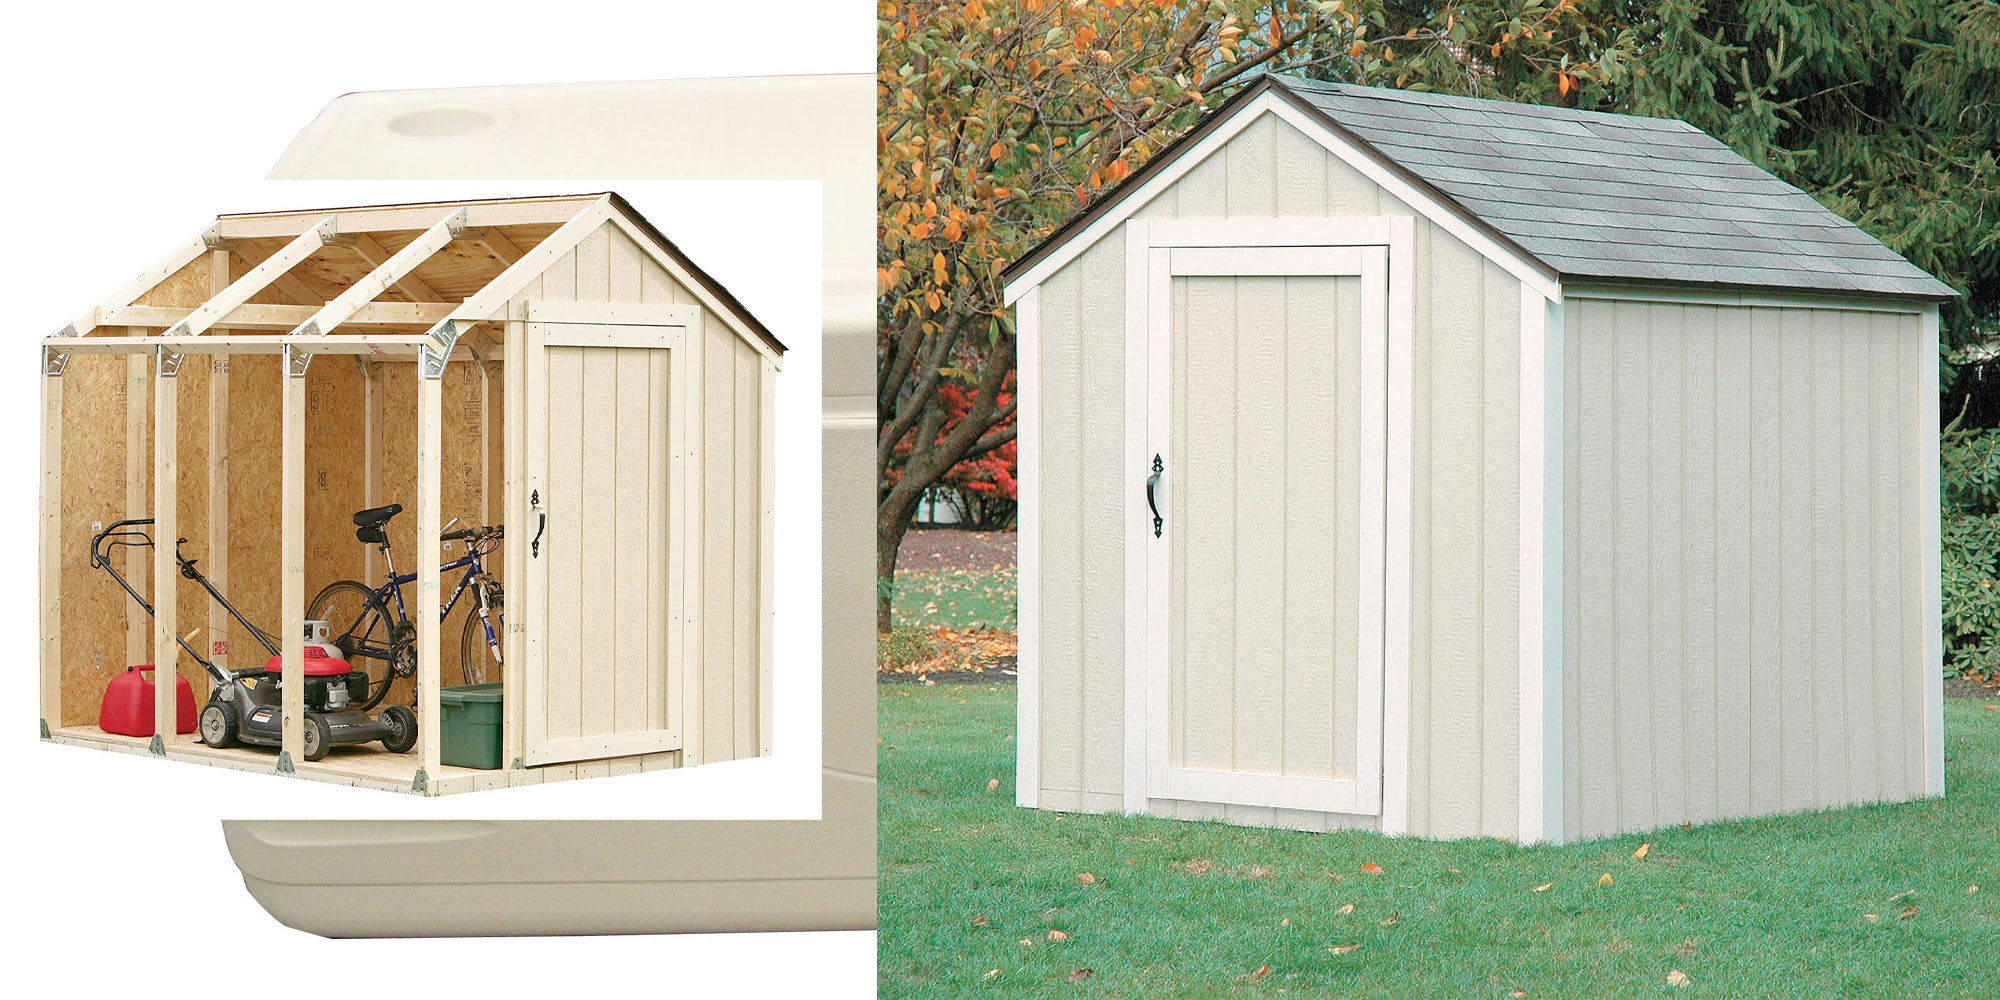 Build it yourself wood shed kits